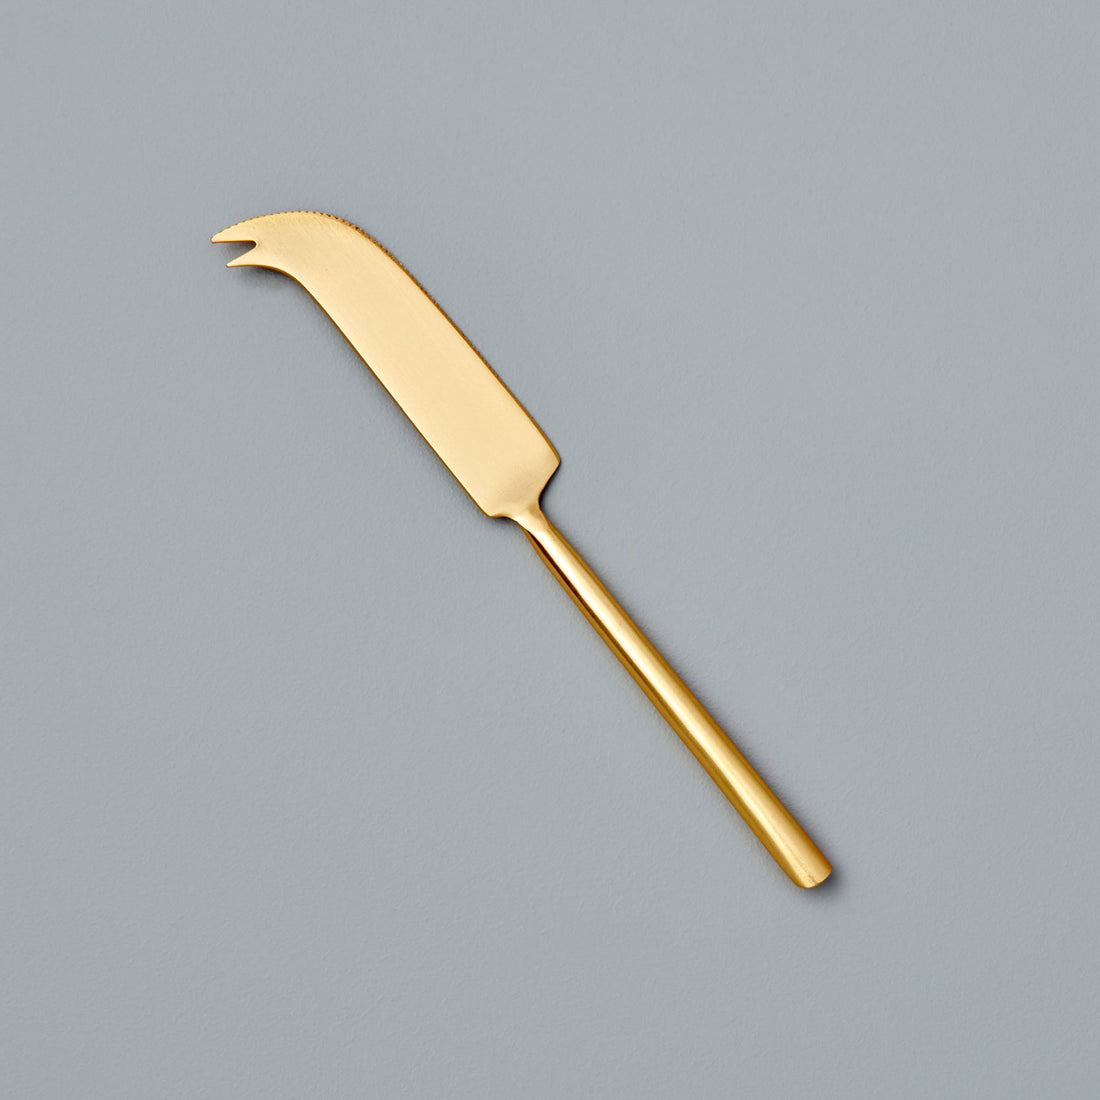 https://cdn.shopify.com/s/files/1/0376/0920/9900/products/Be-Home_Matte-Gold-Cheese-Knife-_25-1031.jpg?v=1611260127&width=1100